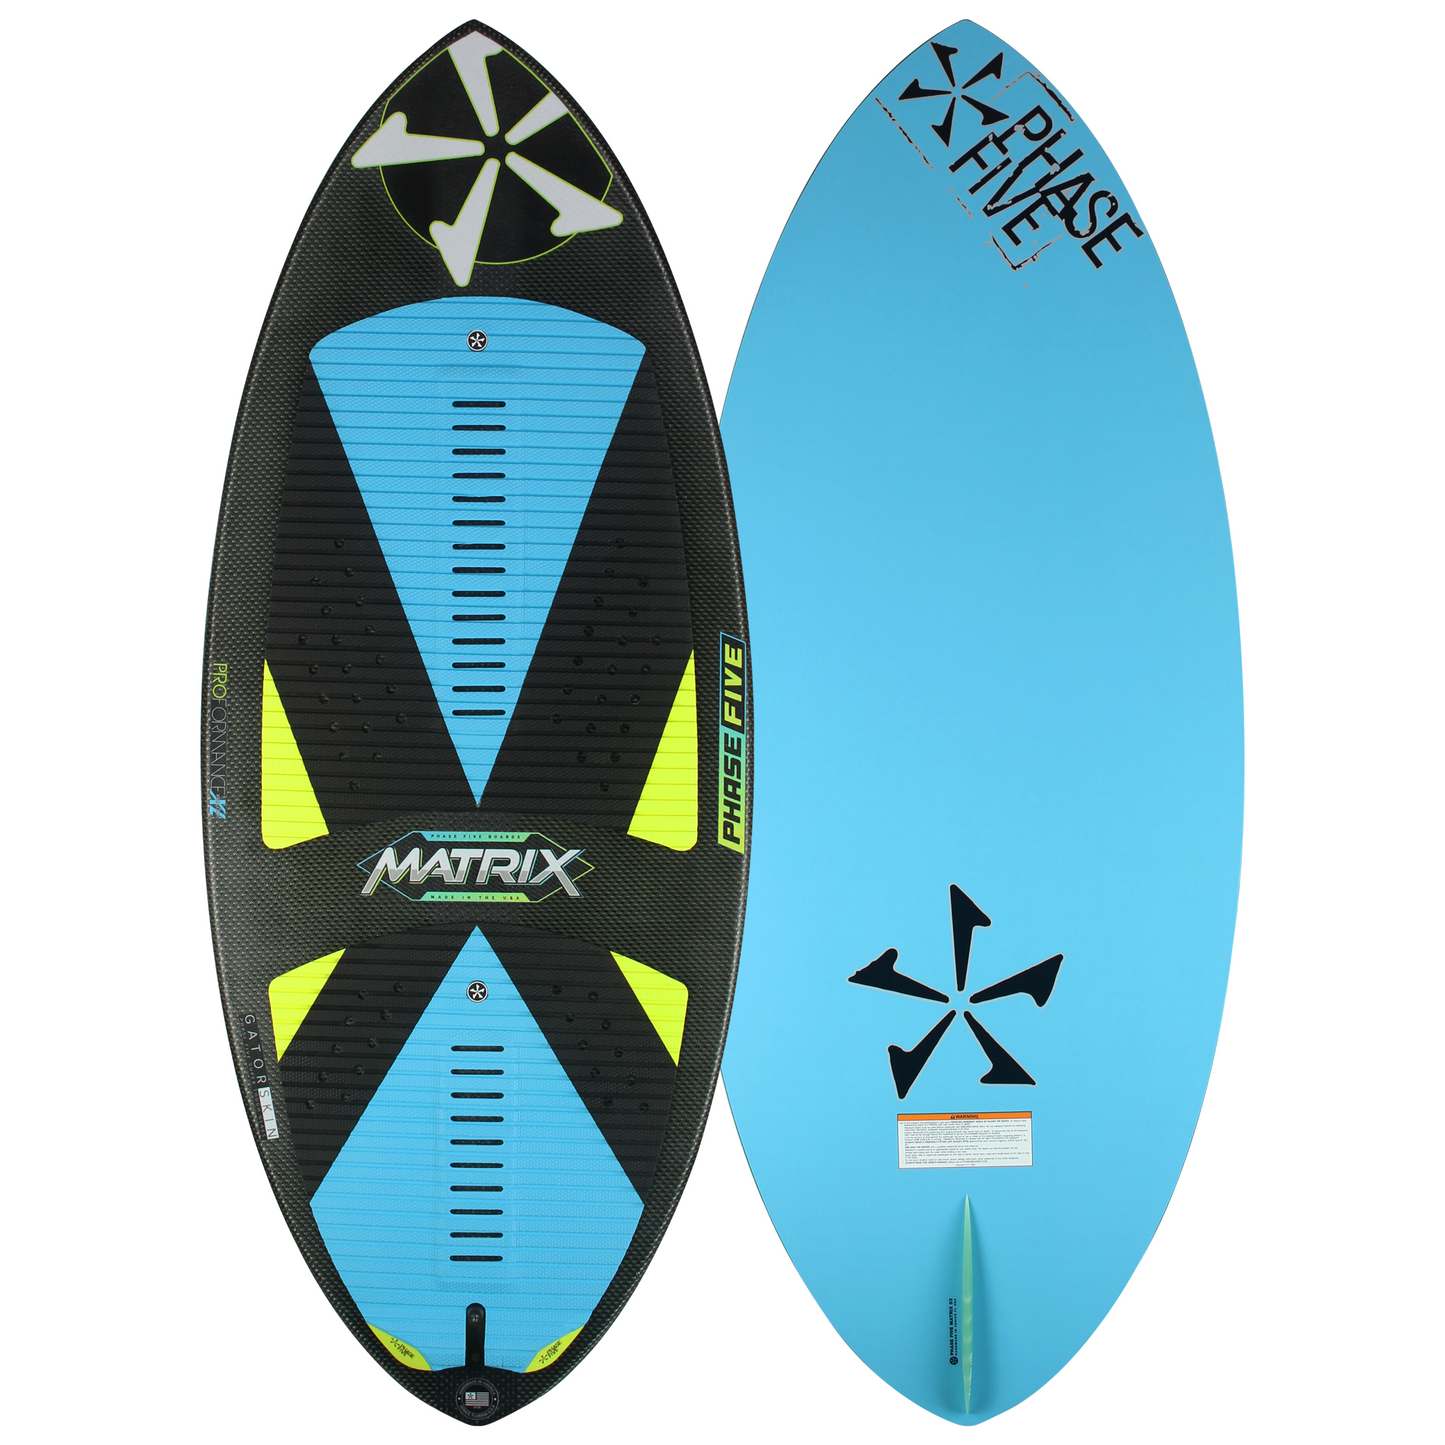 Phase Five The Matrix wake surf front and back 